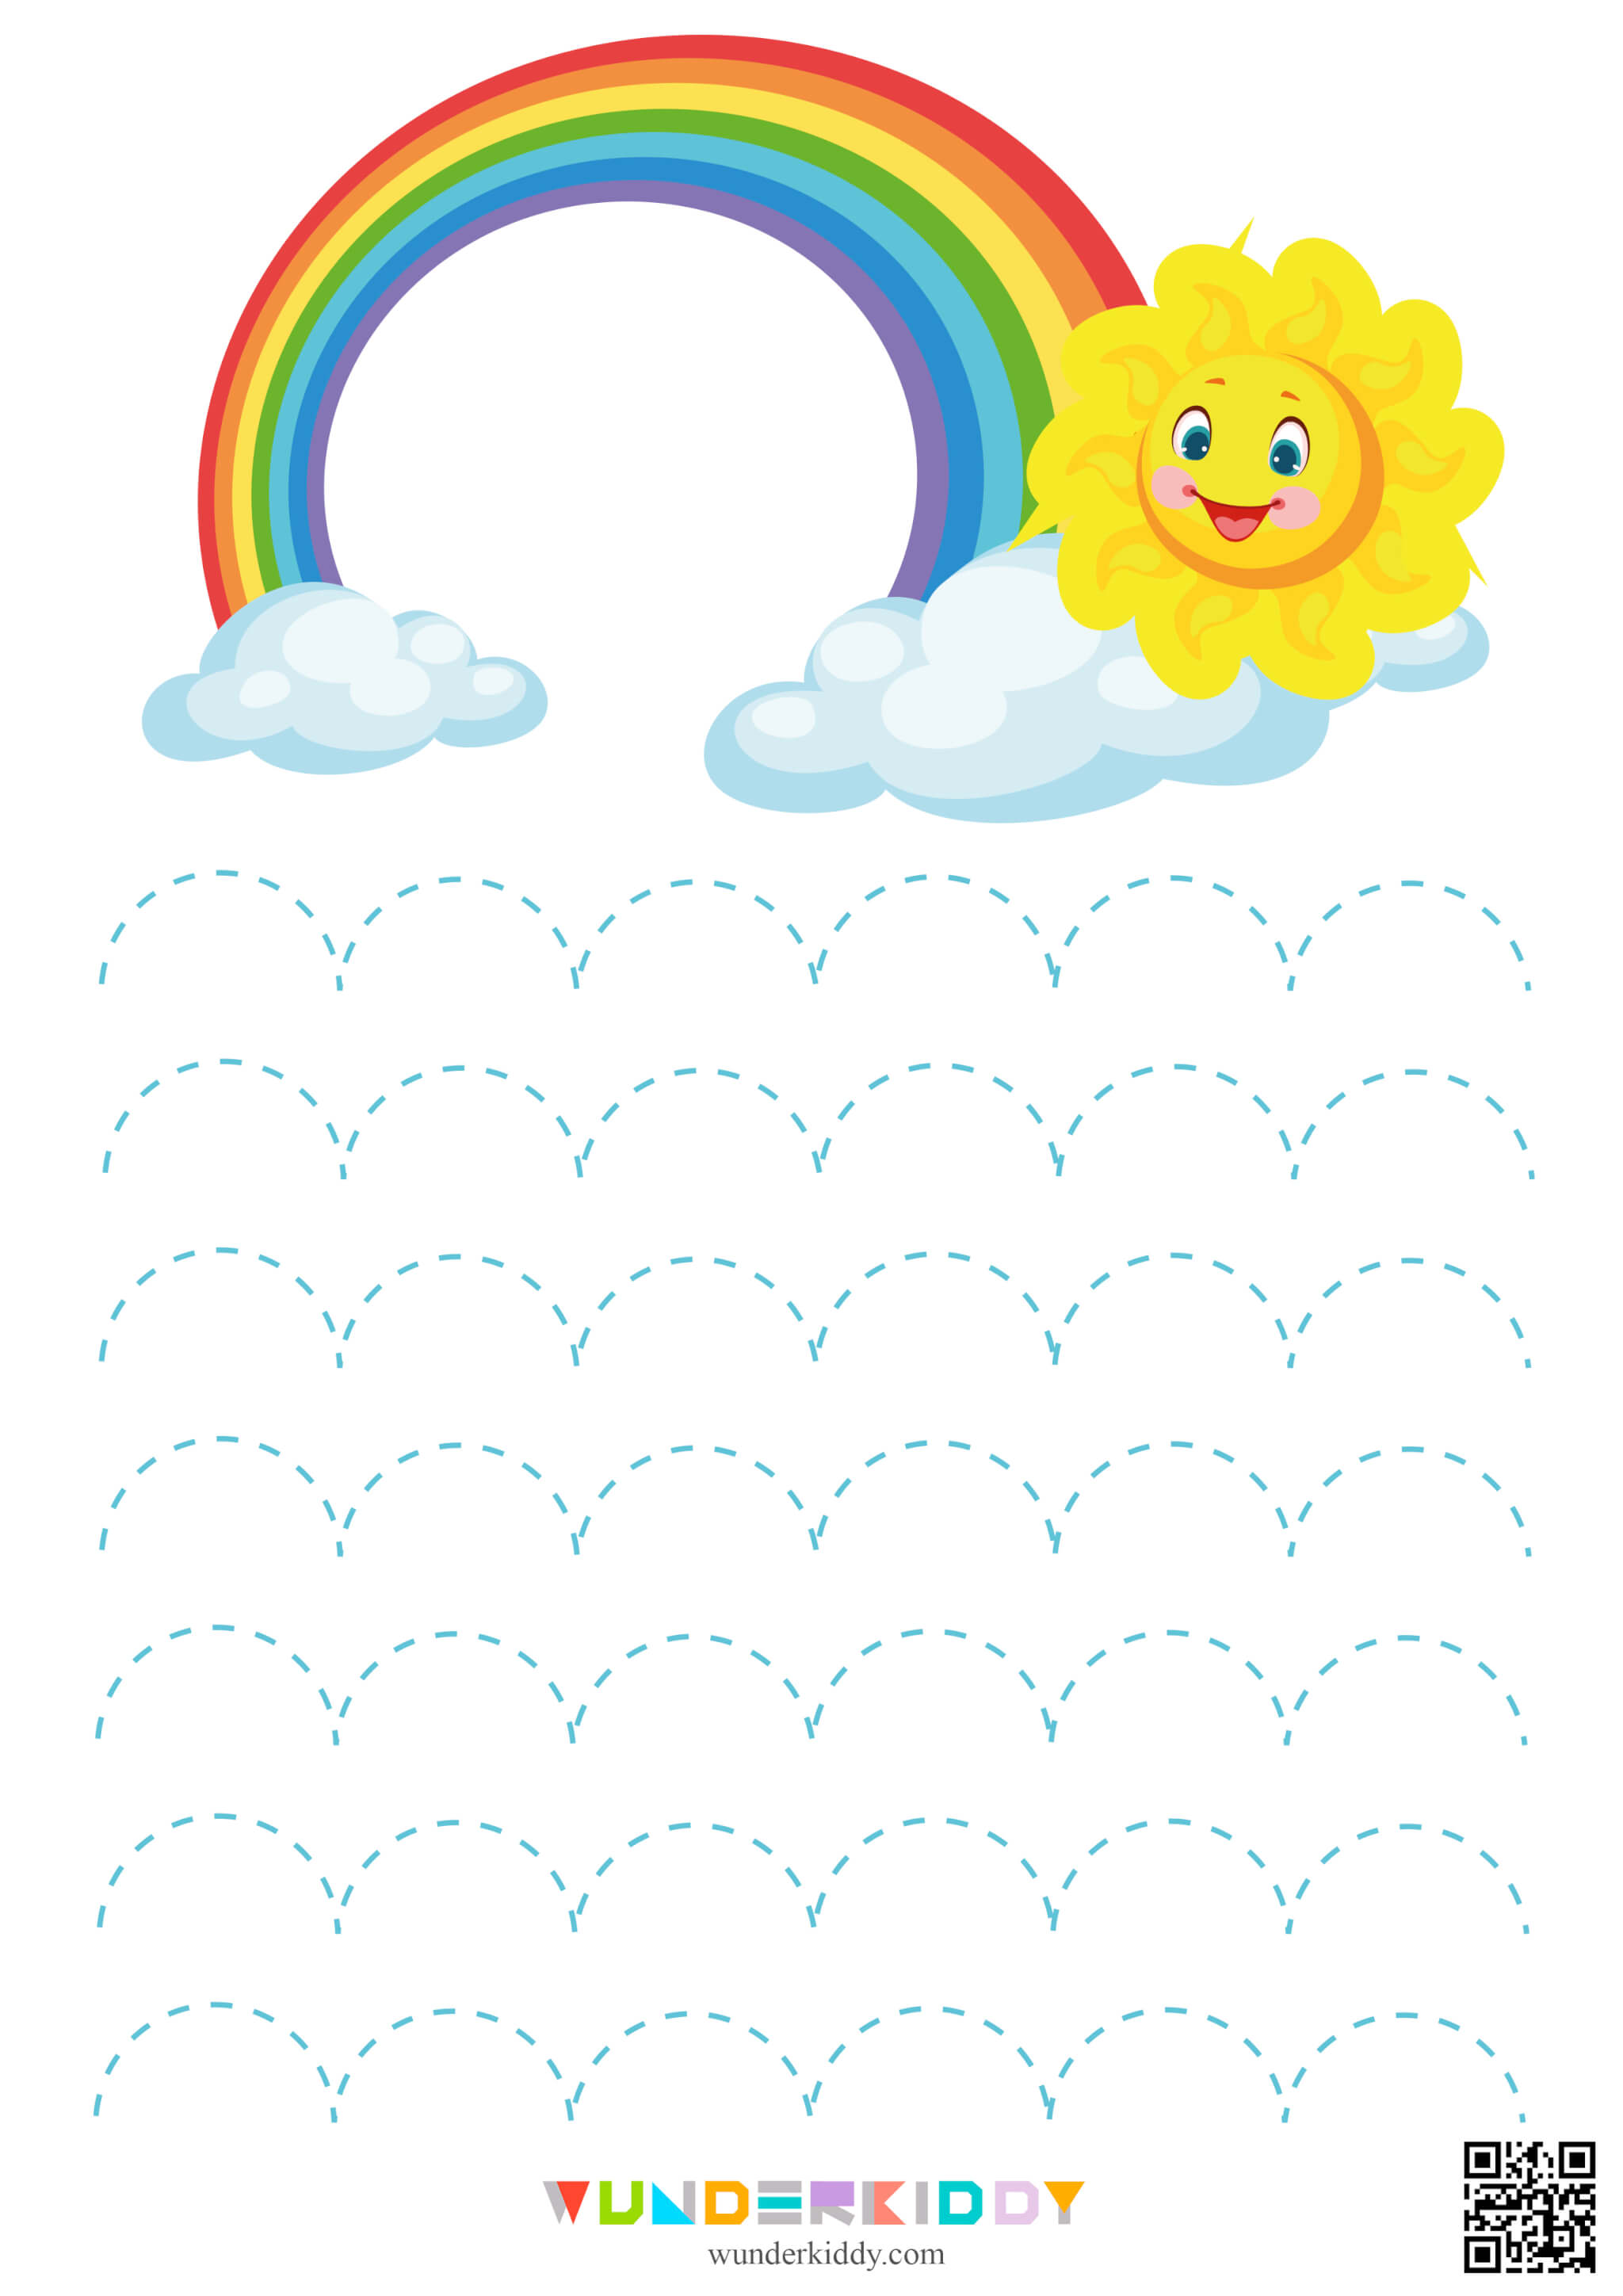 Worksheets «Sun and rainbow» - Image 5